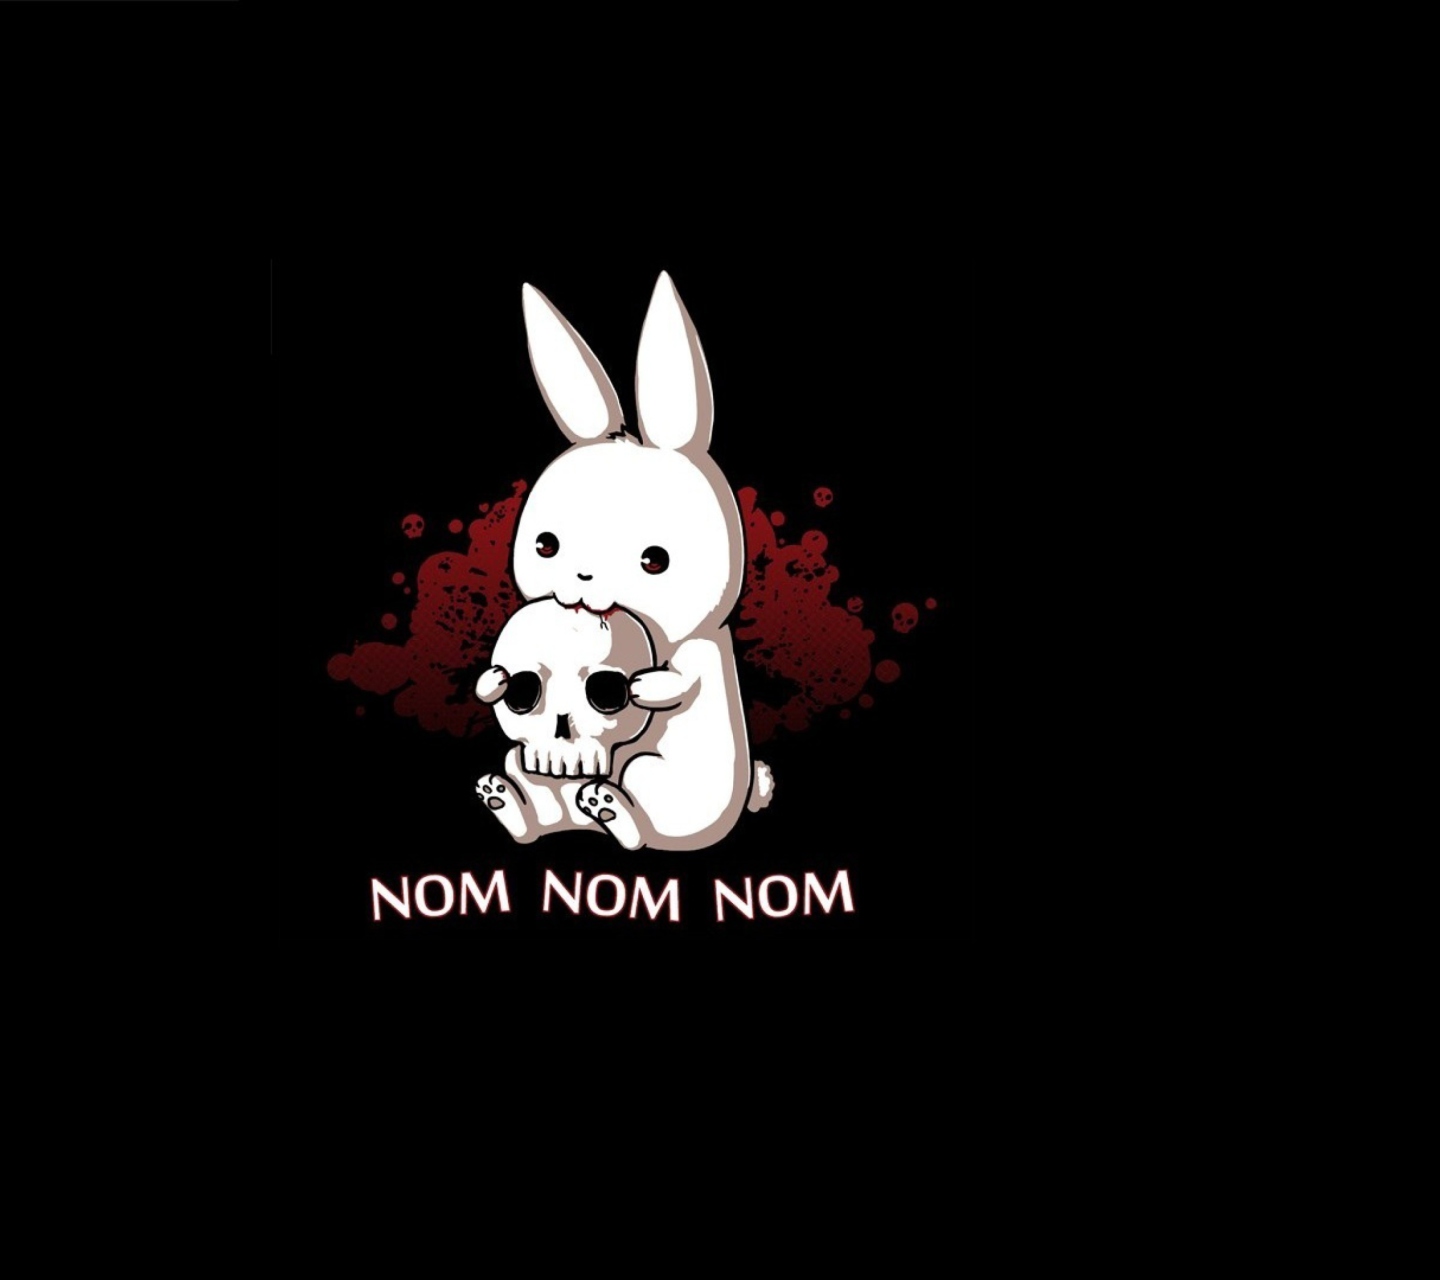 Blood-Thirsty Hare wallpaper 1440x1280